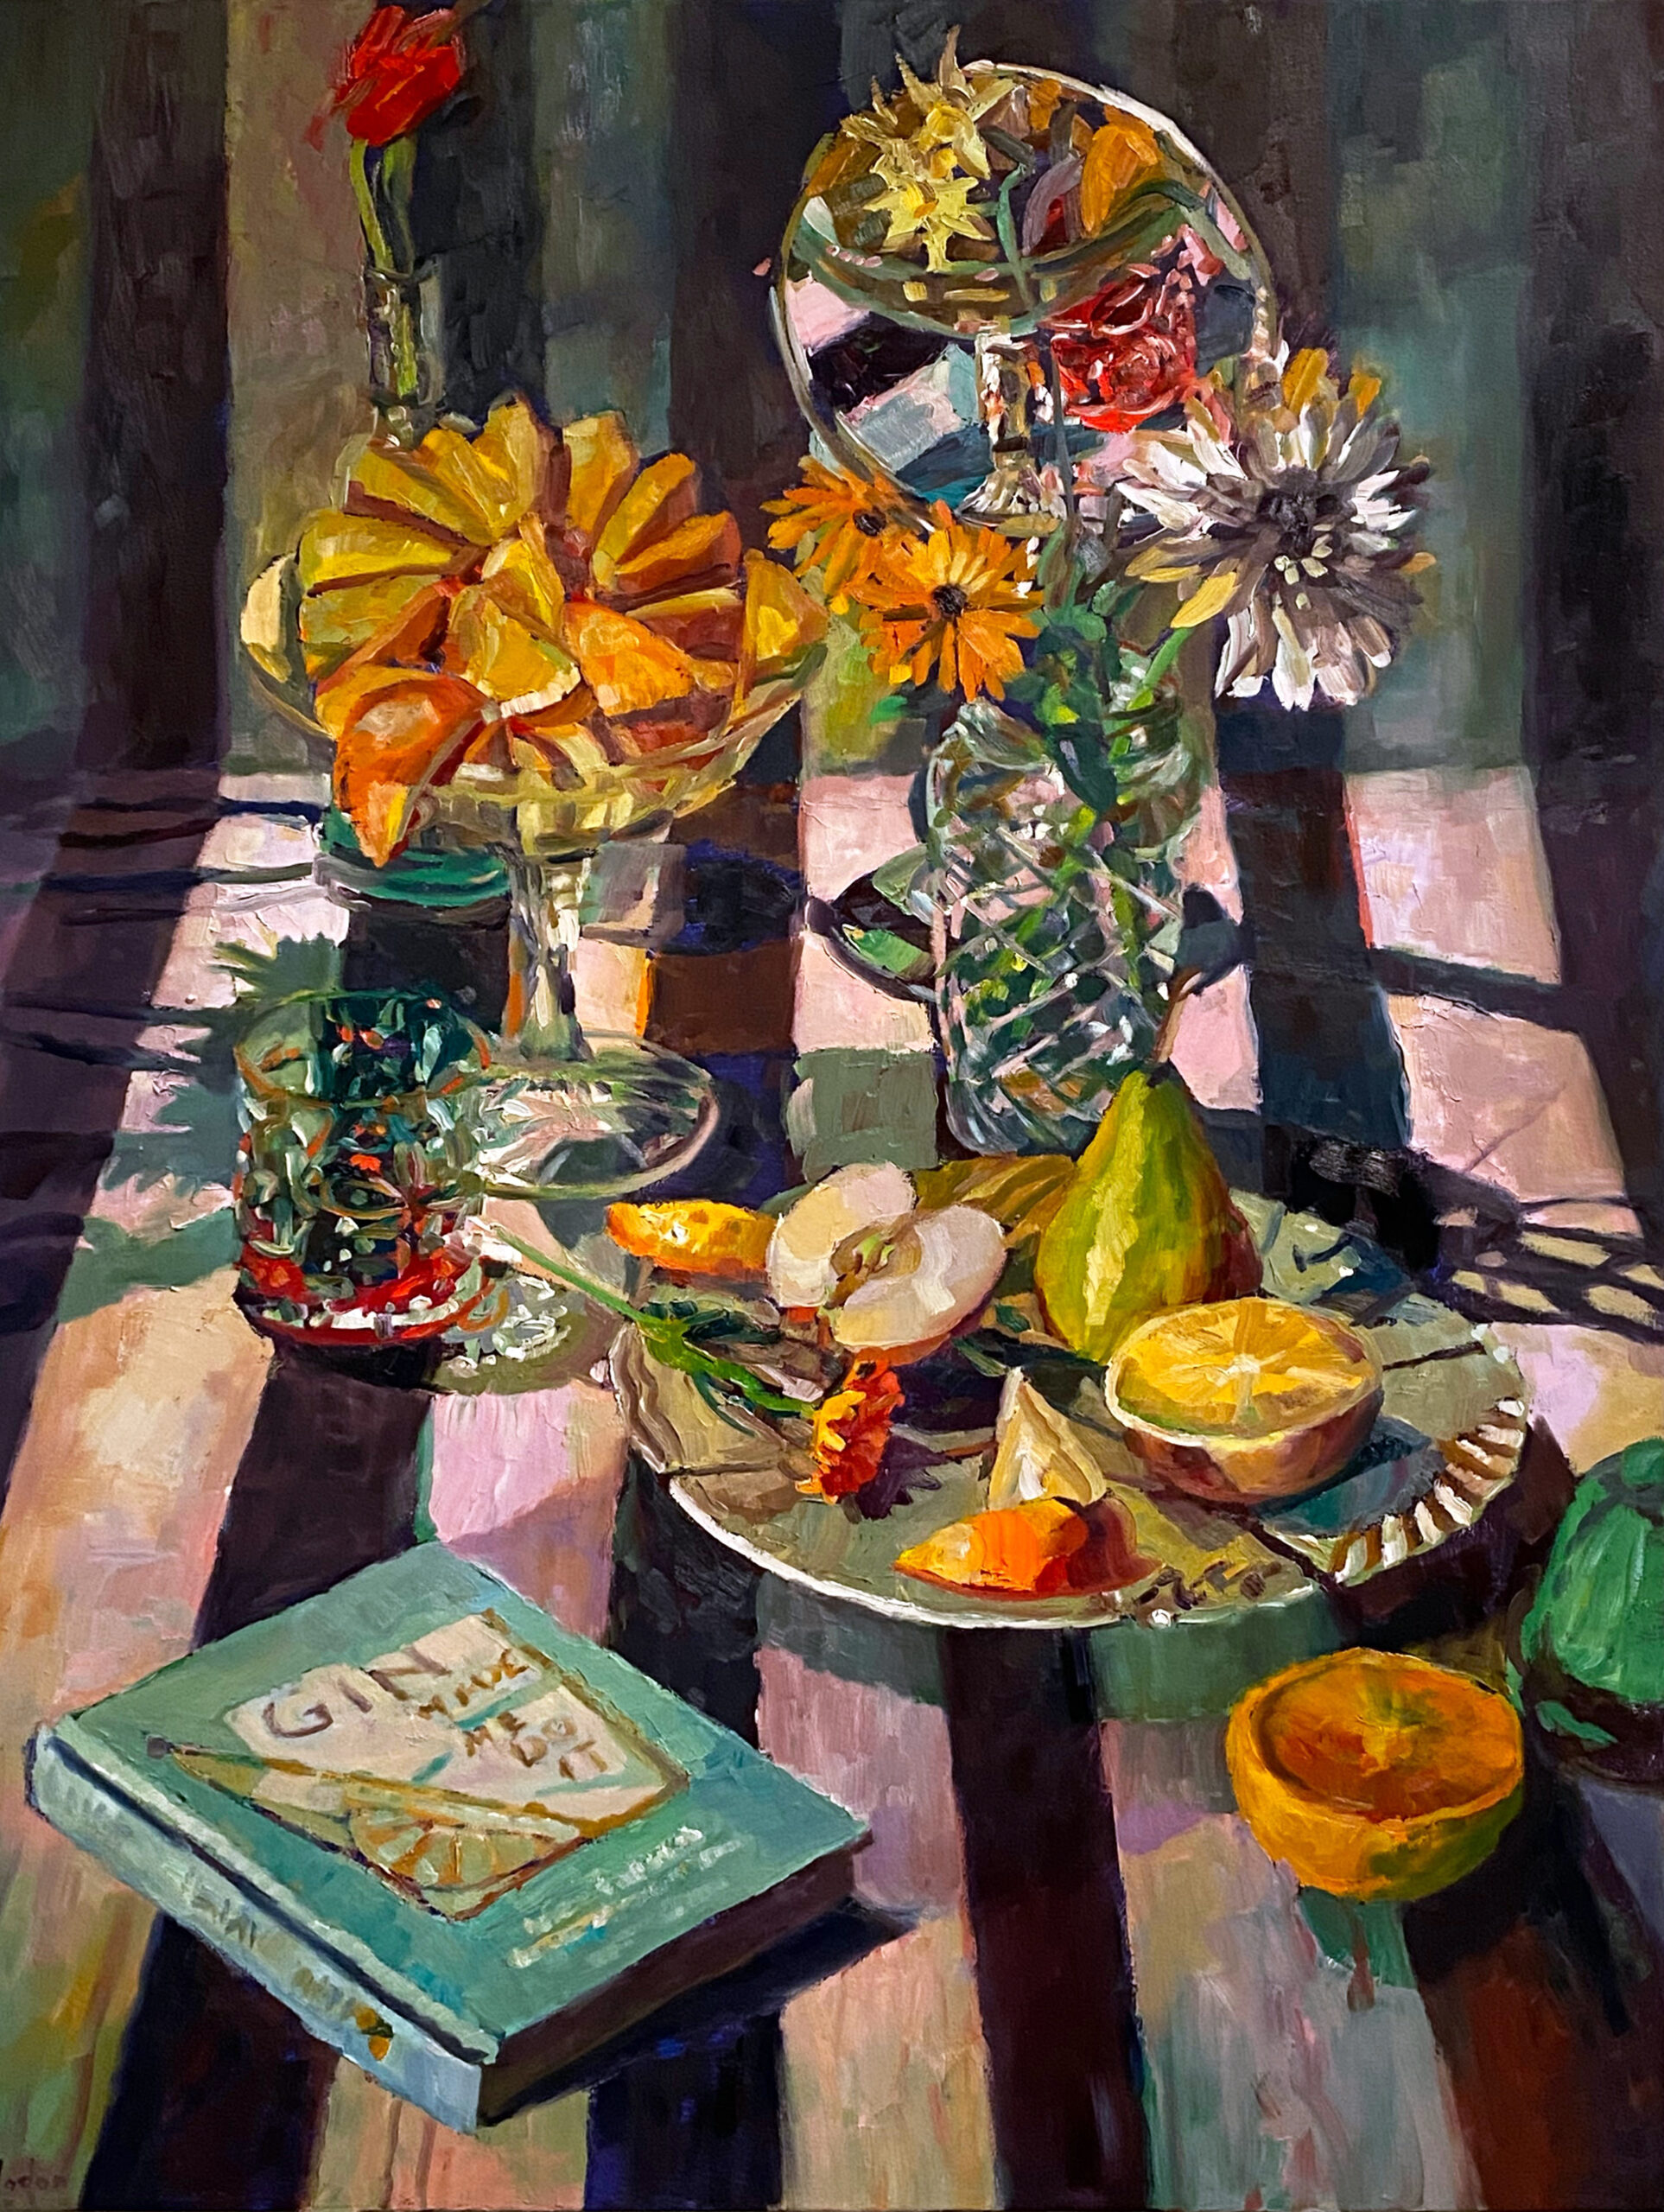 Rosemary Valadon 'Afernoon Sojourn' oil on canvas 122 x 91cm $20,000